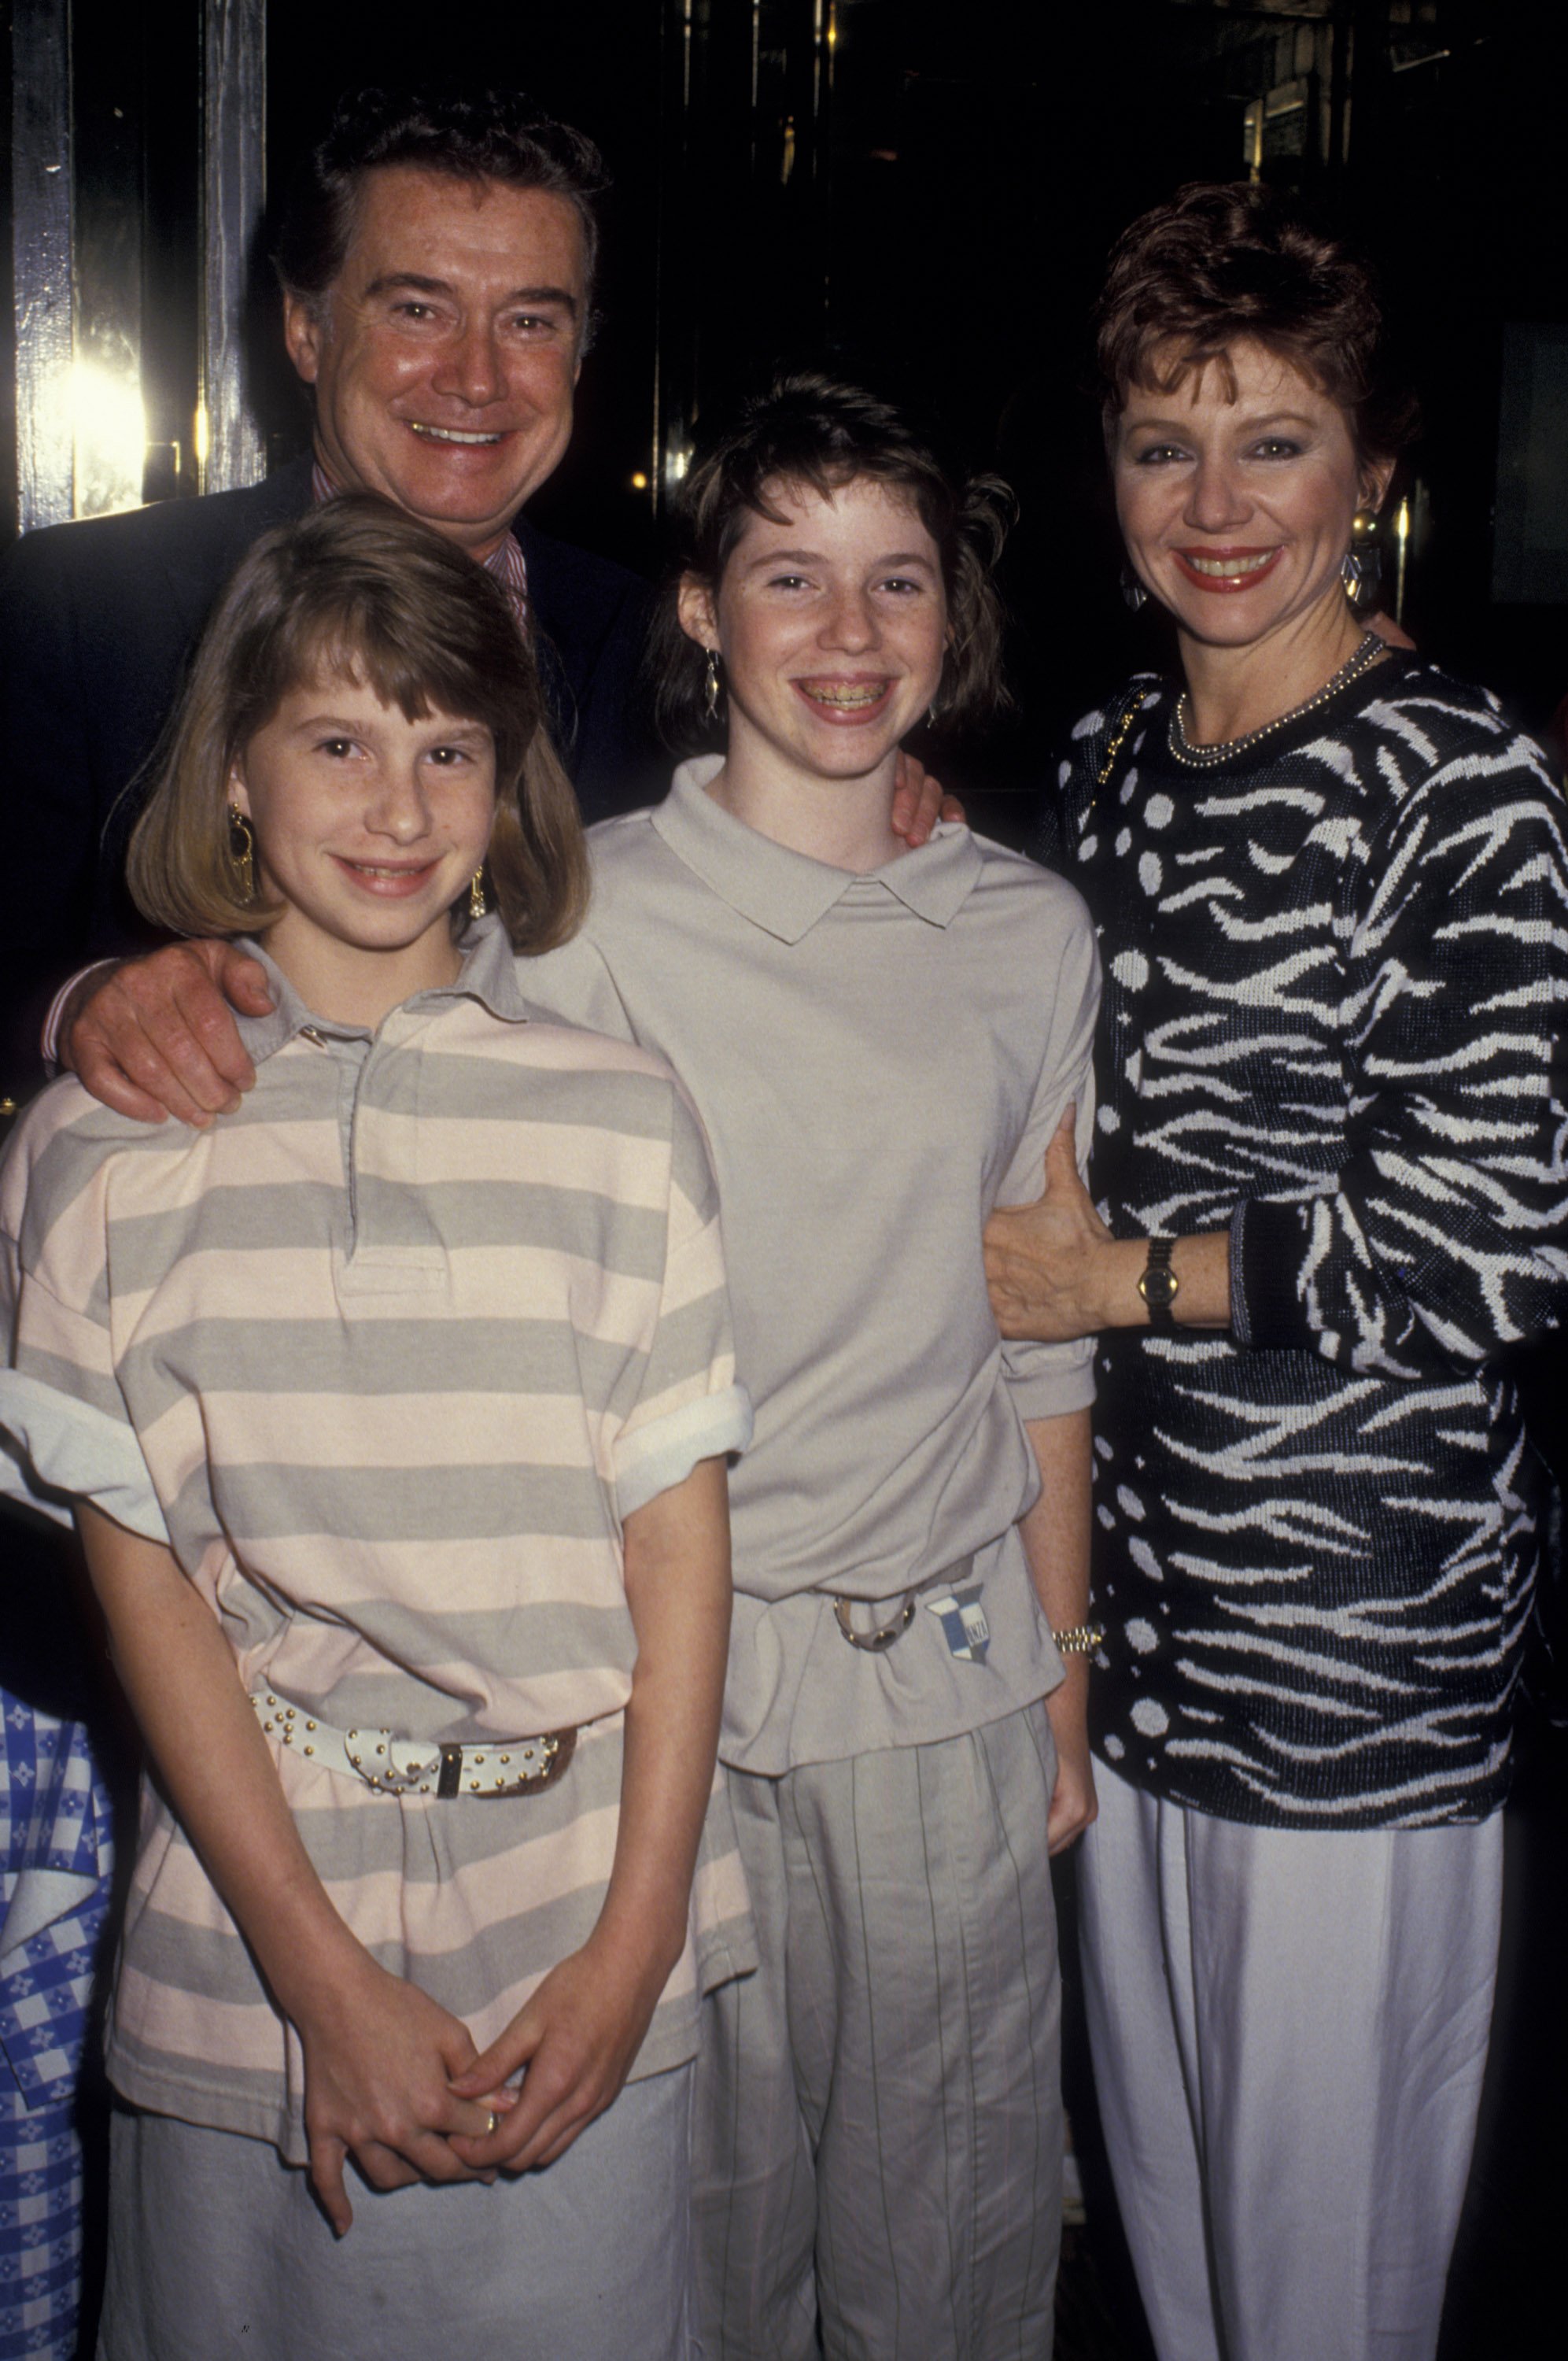 Regis Philbin, Joy Philbin and daughters Joanna Philbin and Jennifer Philbin attend the premiere party for "The Monster Squad,"  1987, New York City. | Photo: Getty Images